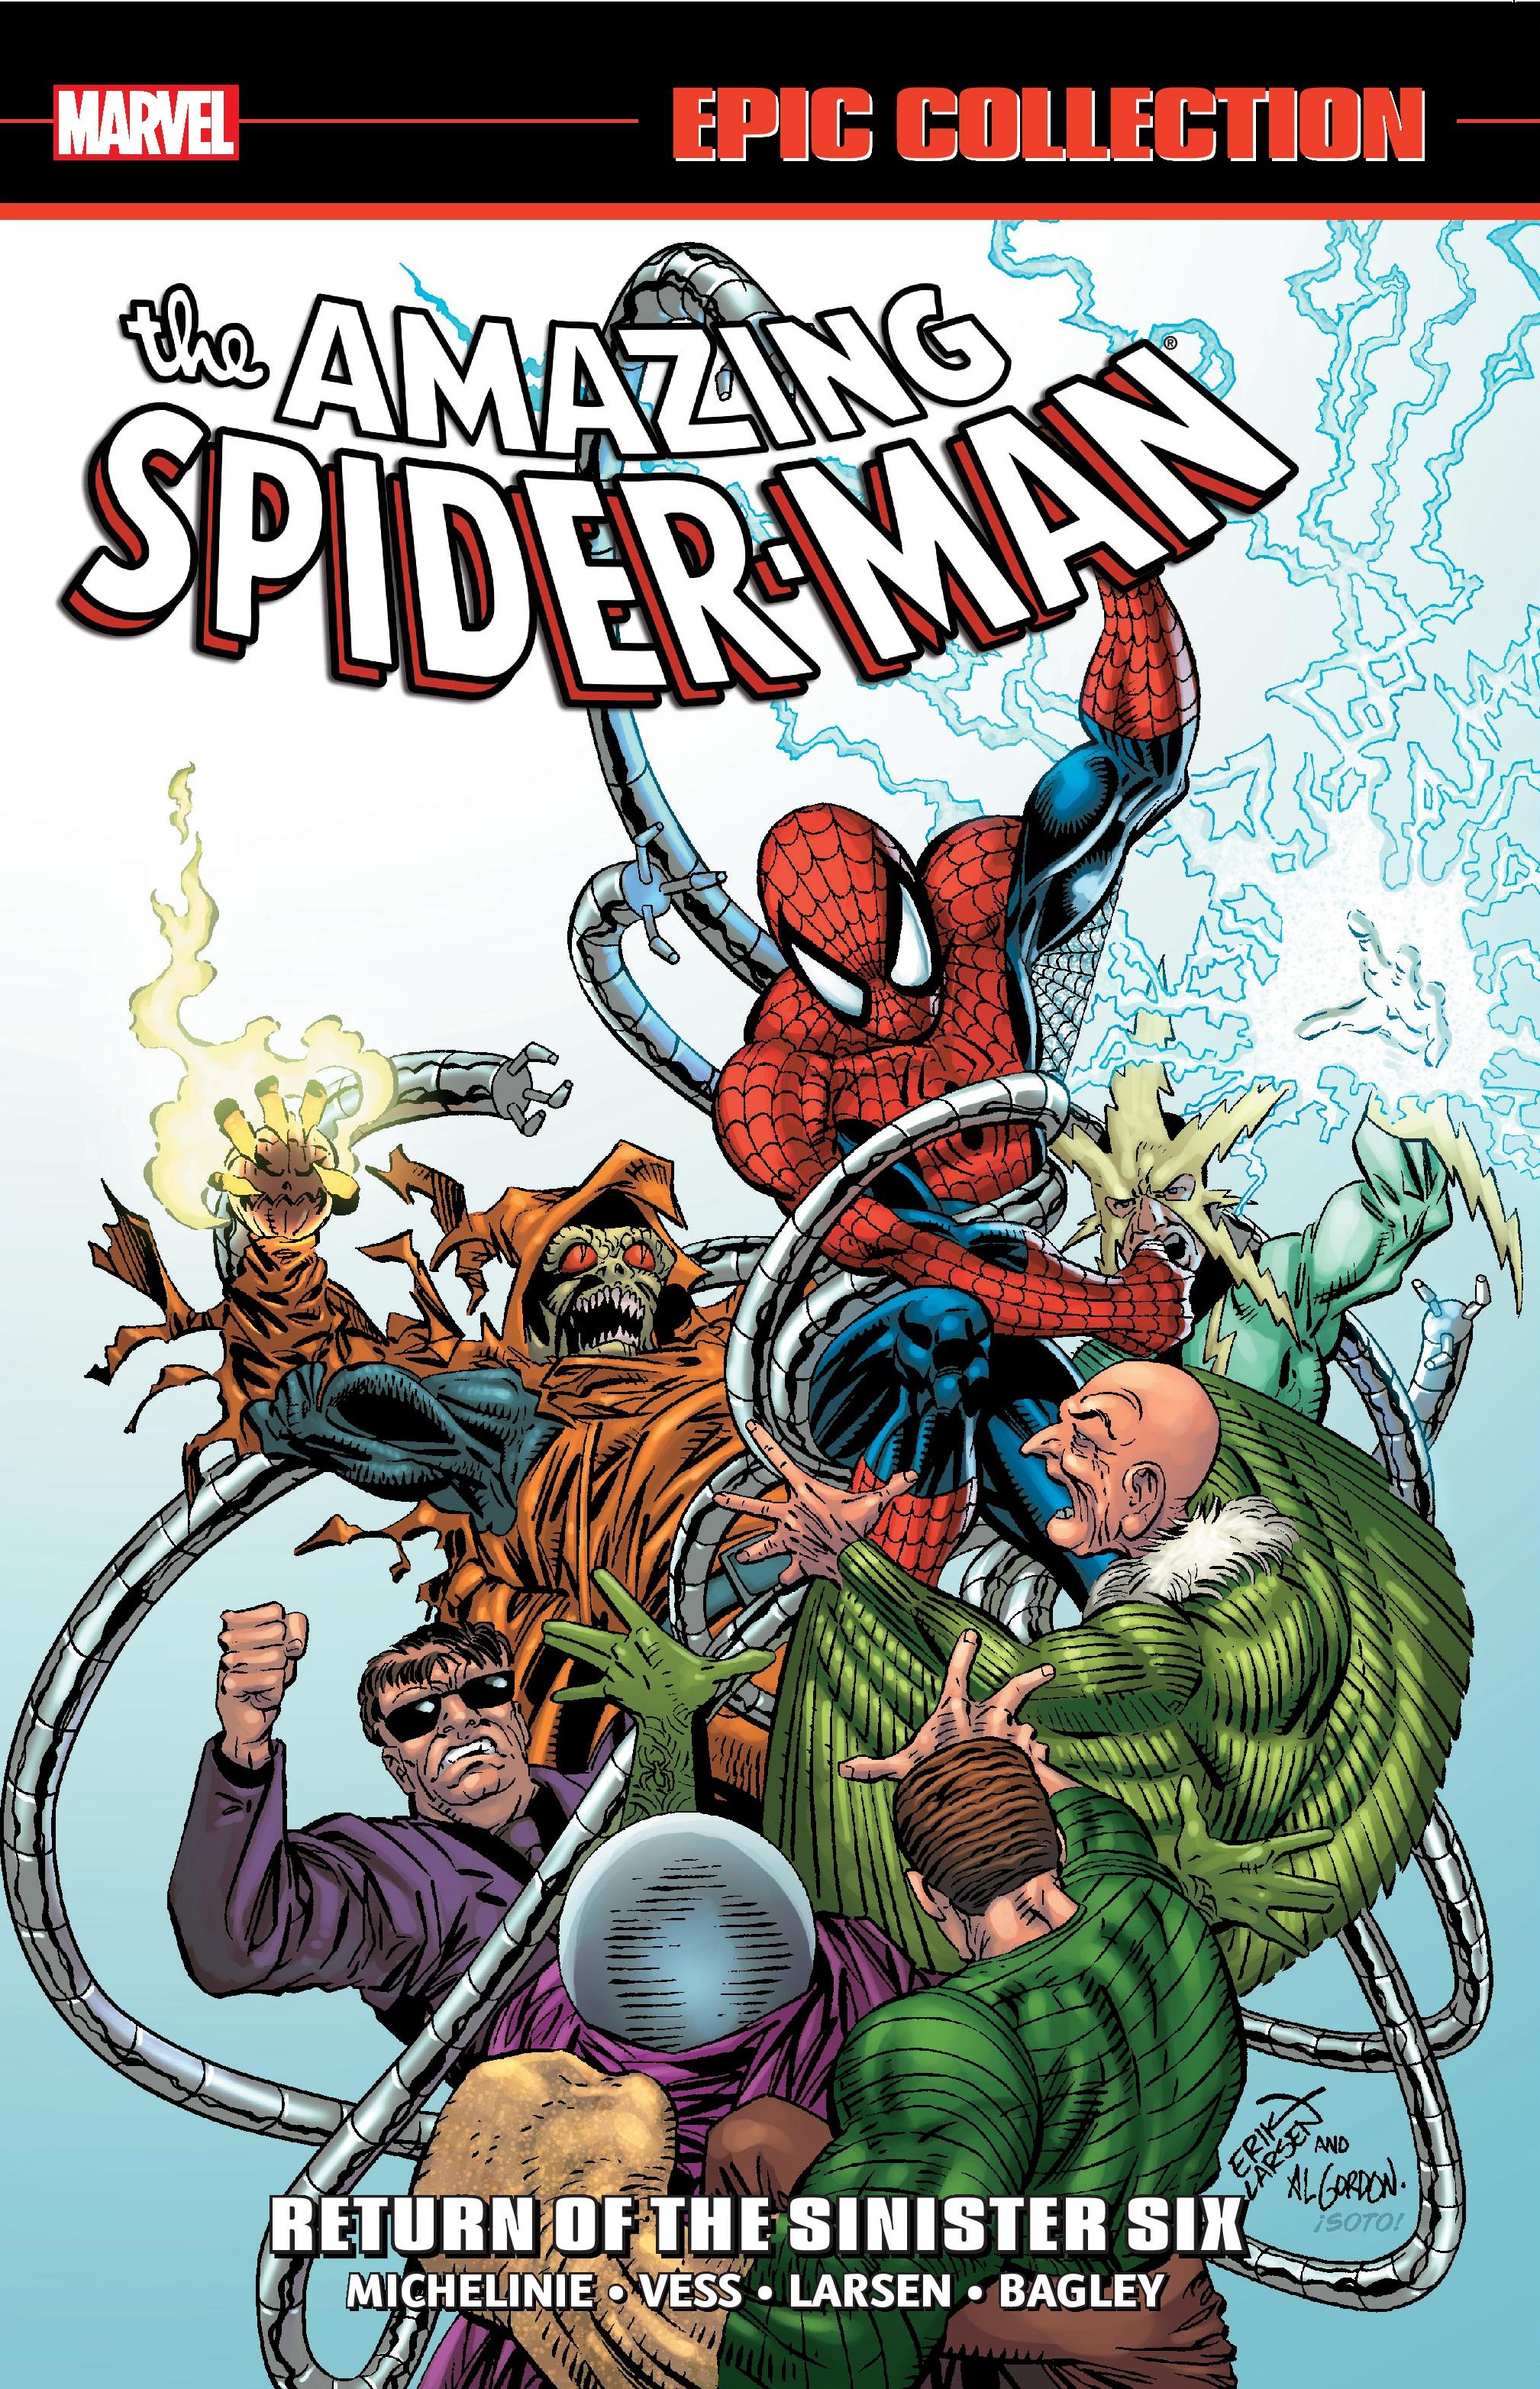 AMAZING SPIDER-MAN EPIC COLLECTION: RETURN OF THE SINISTER SIX TPB (Trade Paperback)